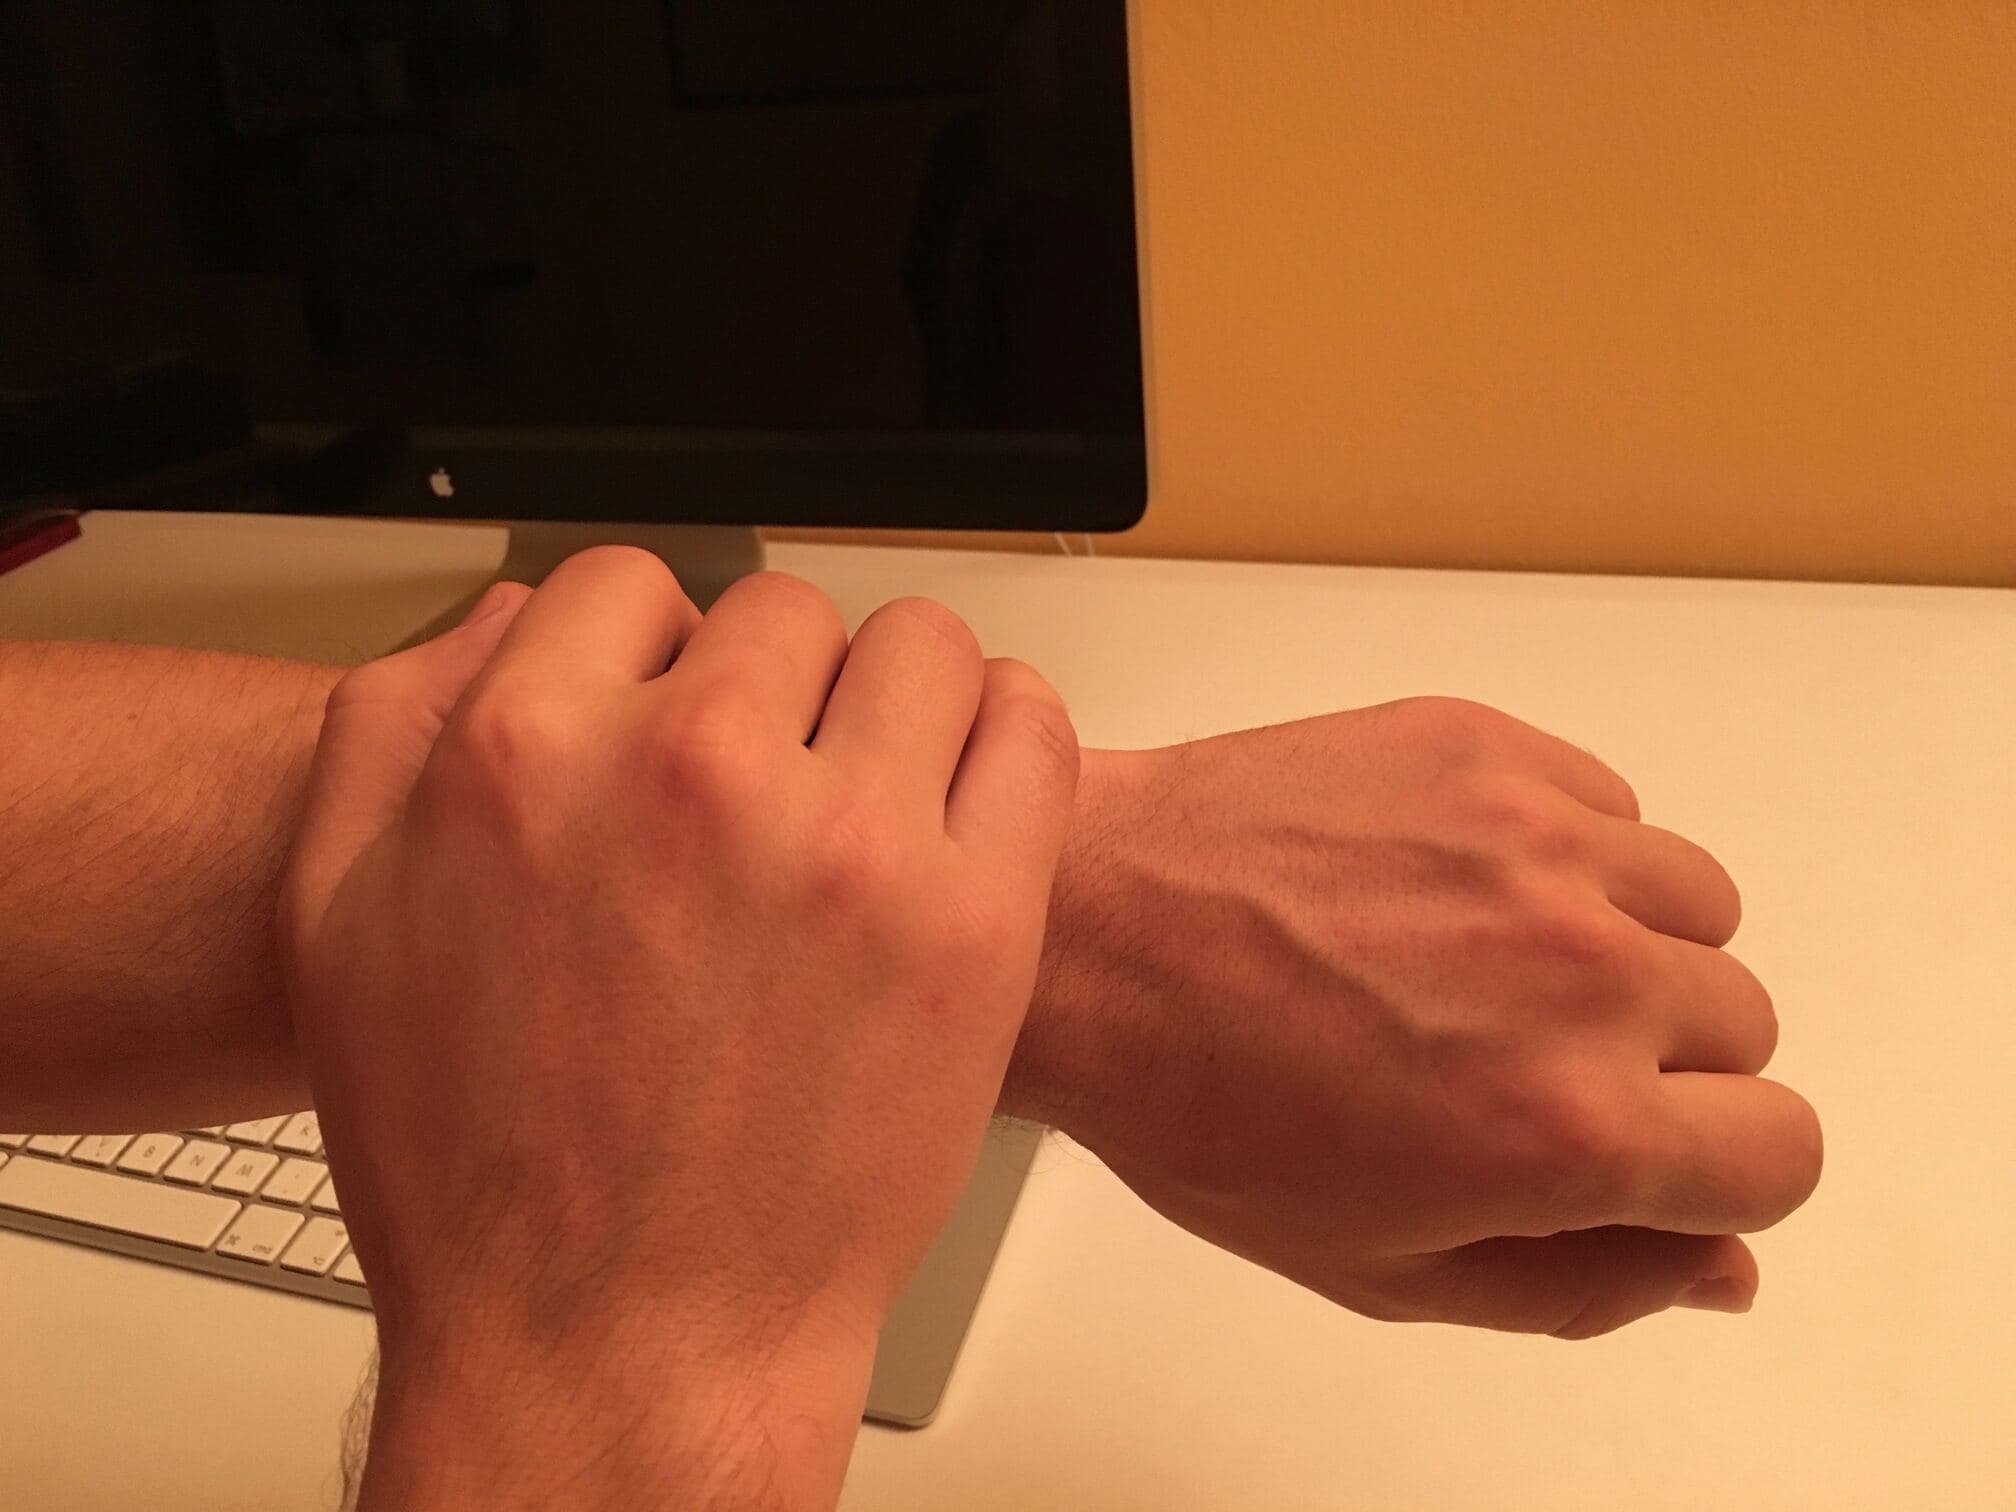 Covering Apple Watch with your palm to mute it